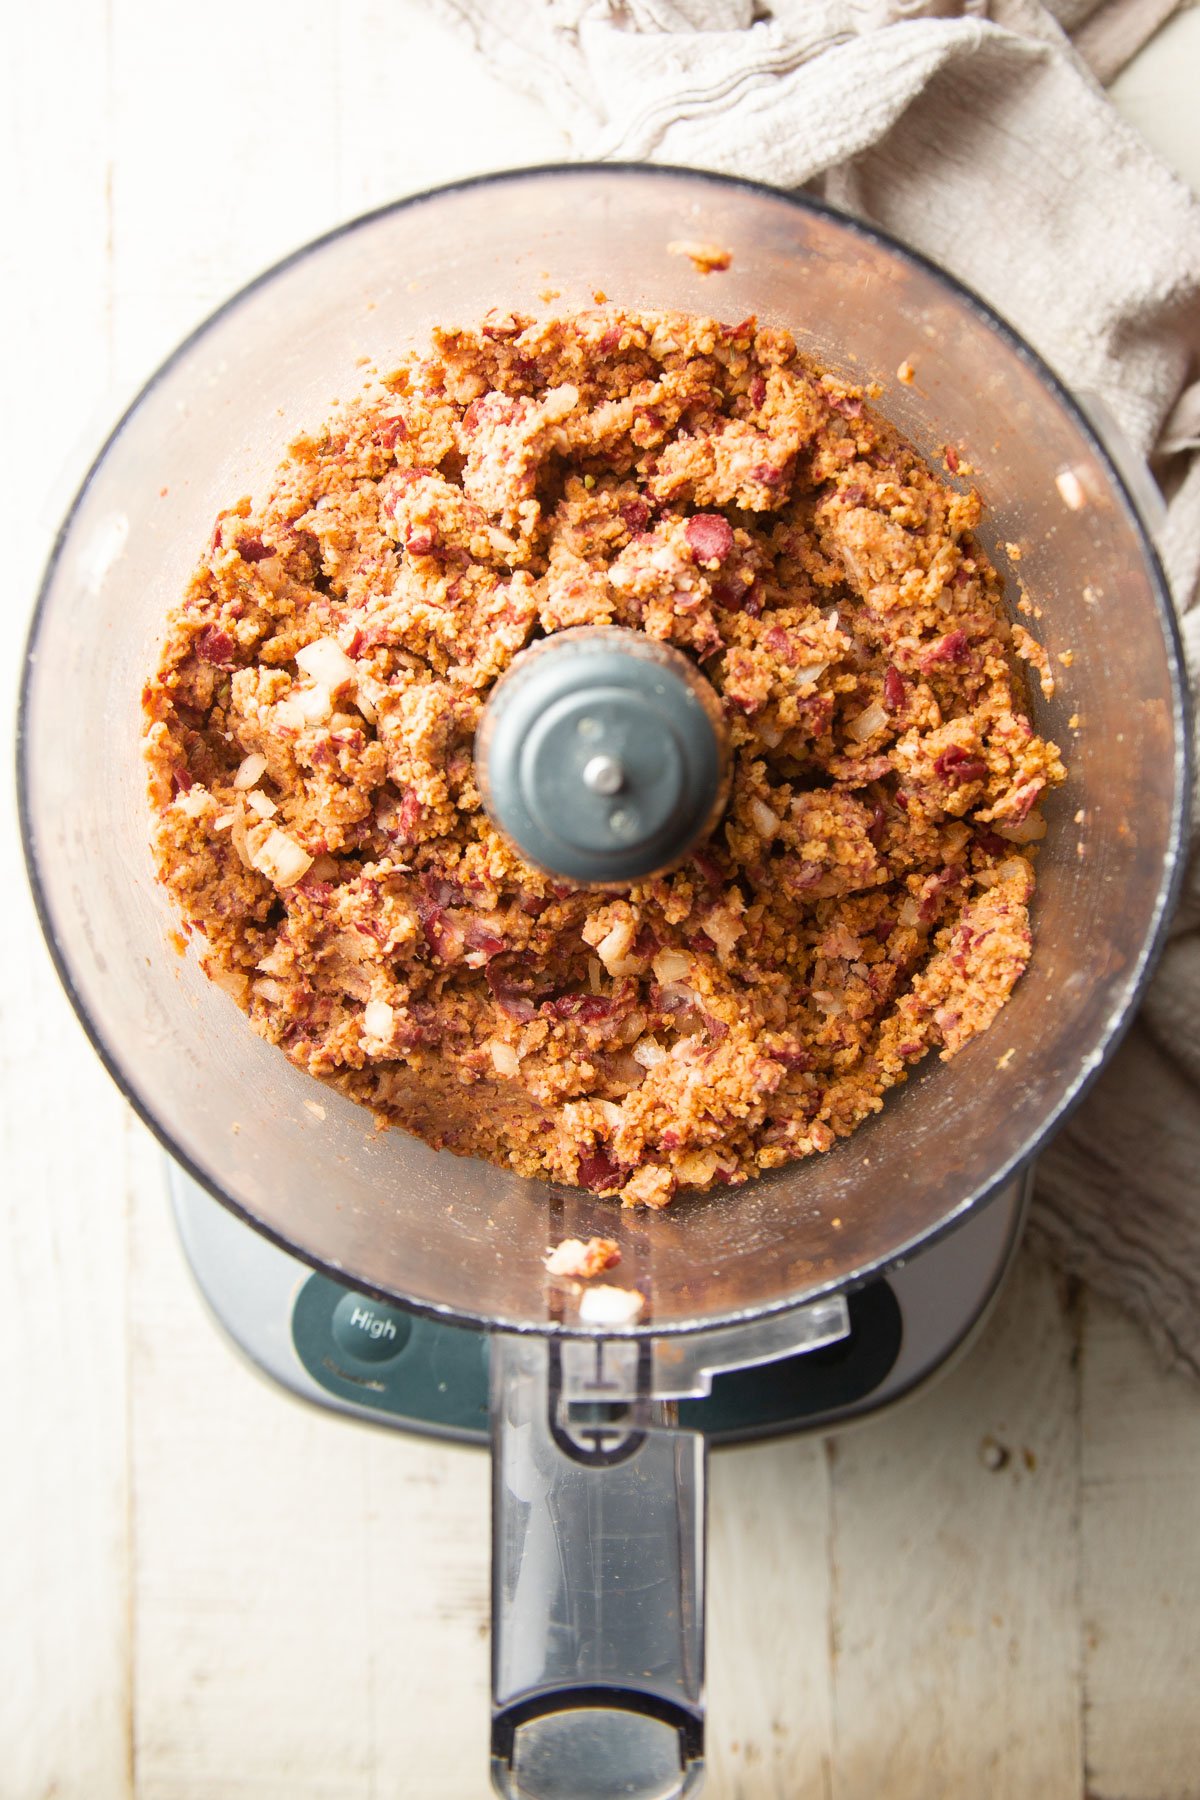 In the bowl of a food processor, combine the mixture to make the red bean vegan meatballs.